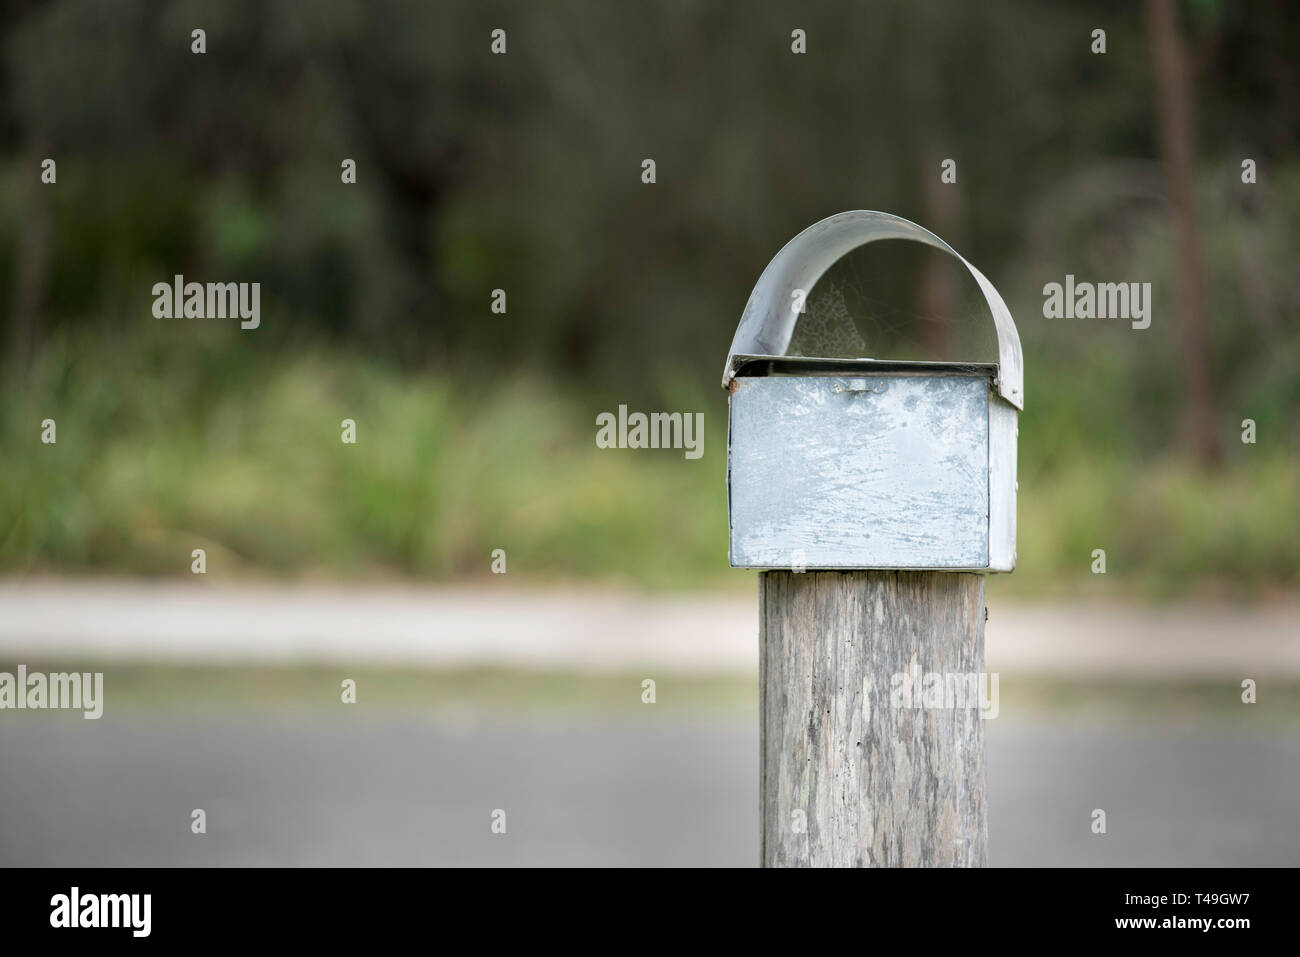 The blank rear end of a traditional metal letterbox mounted on a Eucalyptus (Gum Tree) hard wood post in a suburban rural village in Australia Stock Photo